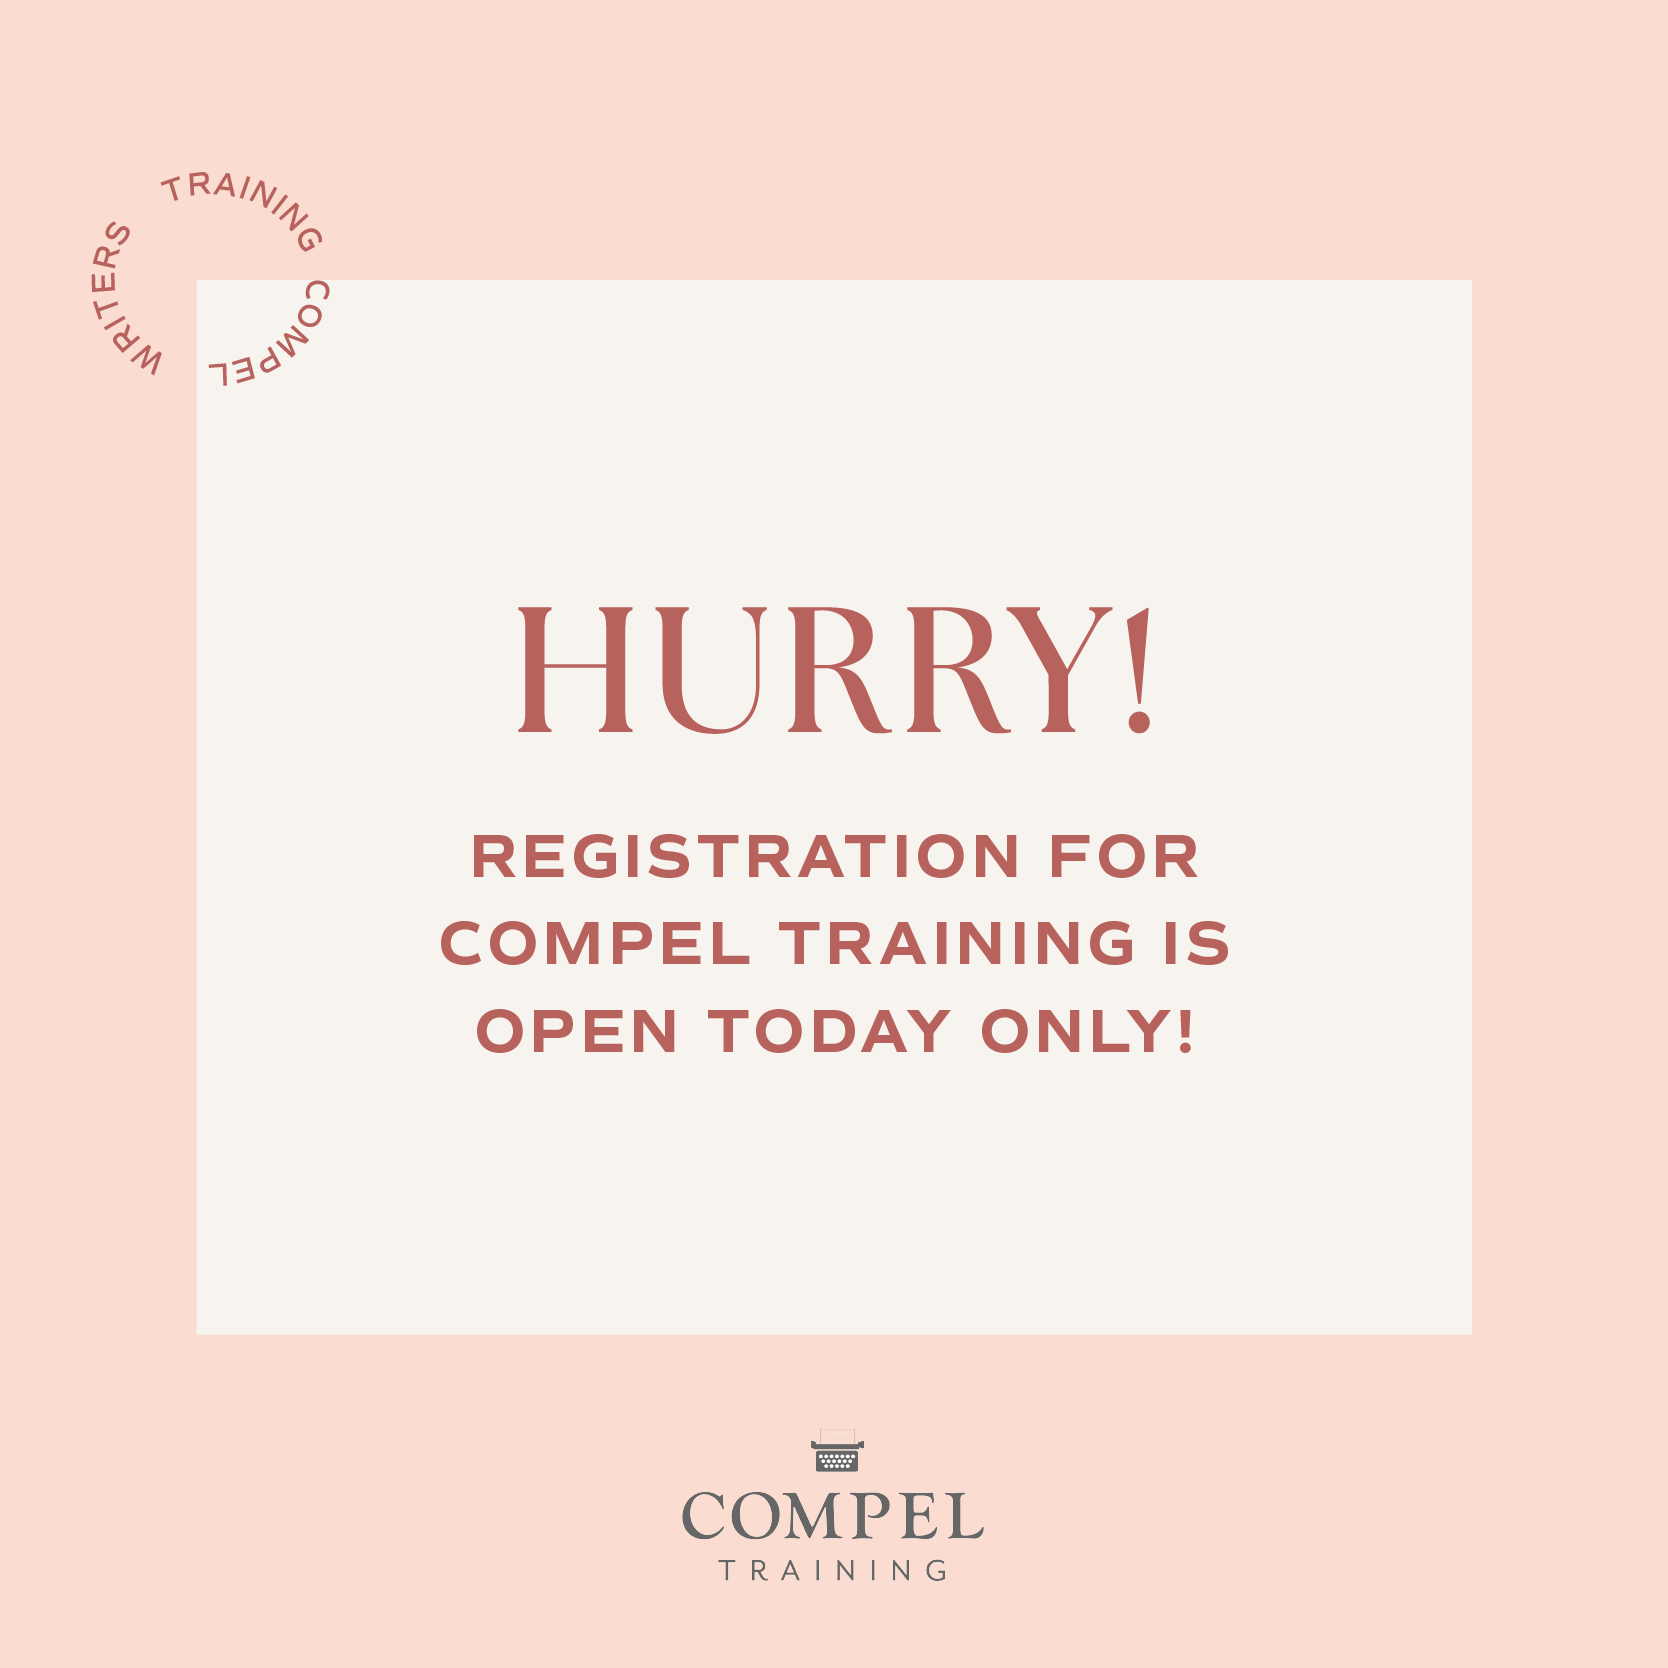 Hurry! Registration for Compel is open today only!